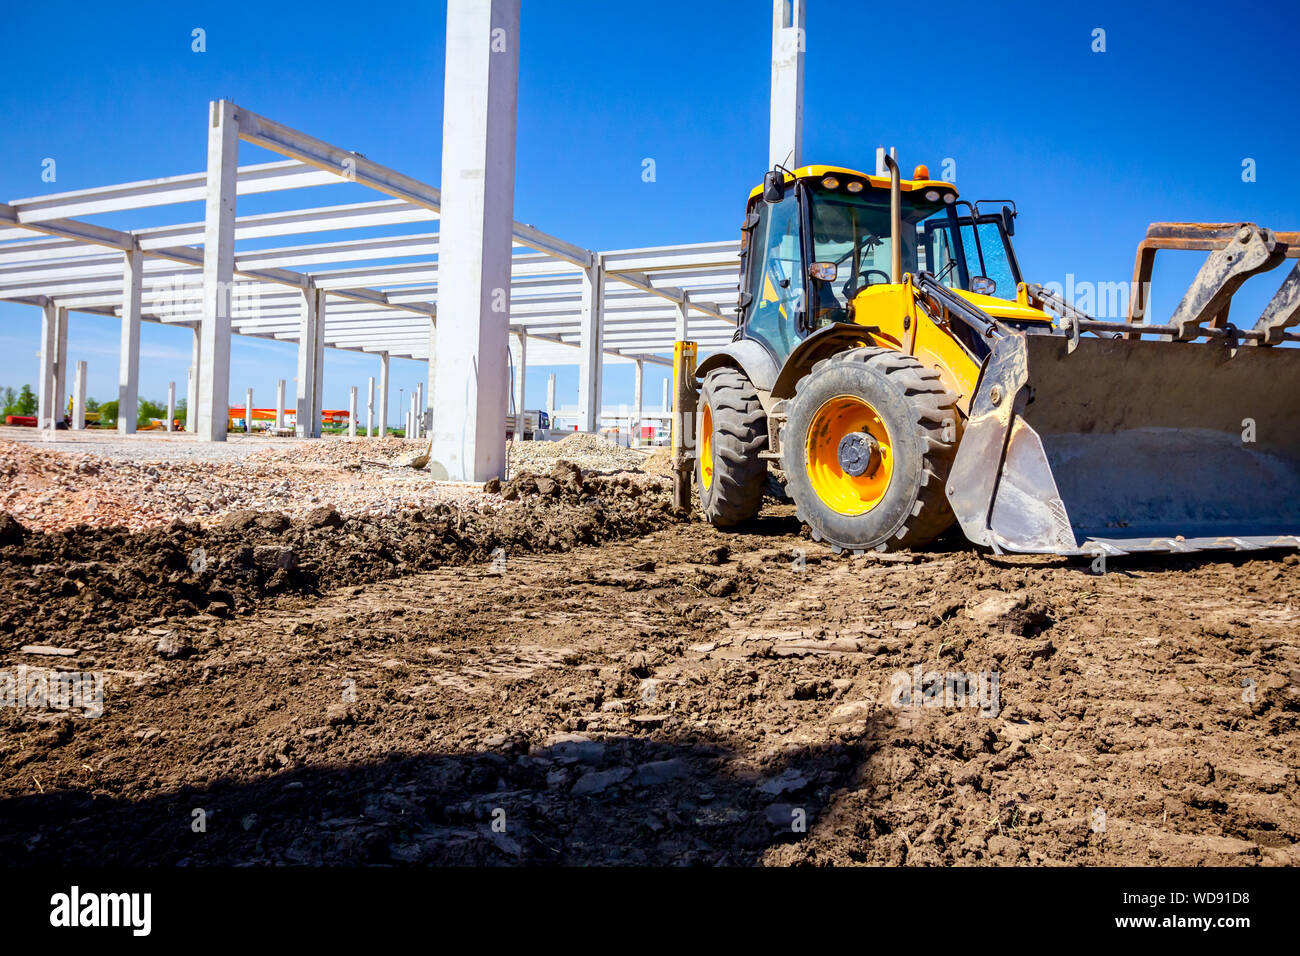 Excavator's front tool, bucket, blade, tall concrete pillars are behind at building site. Stock Photo